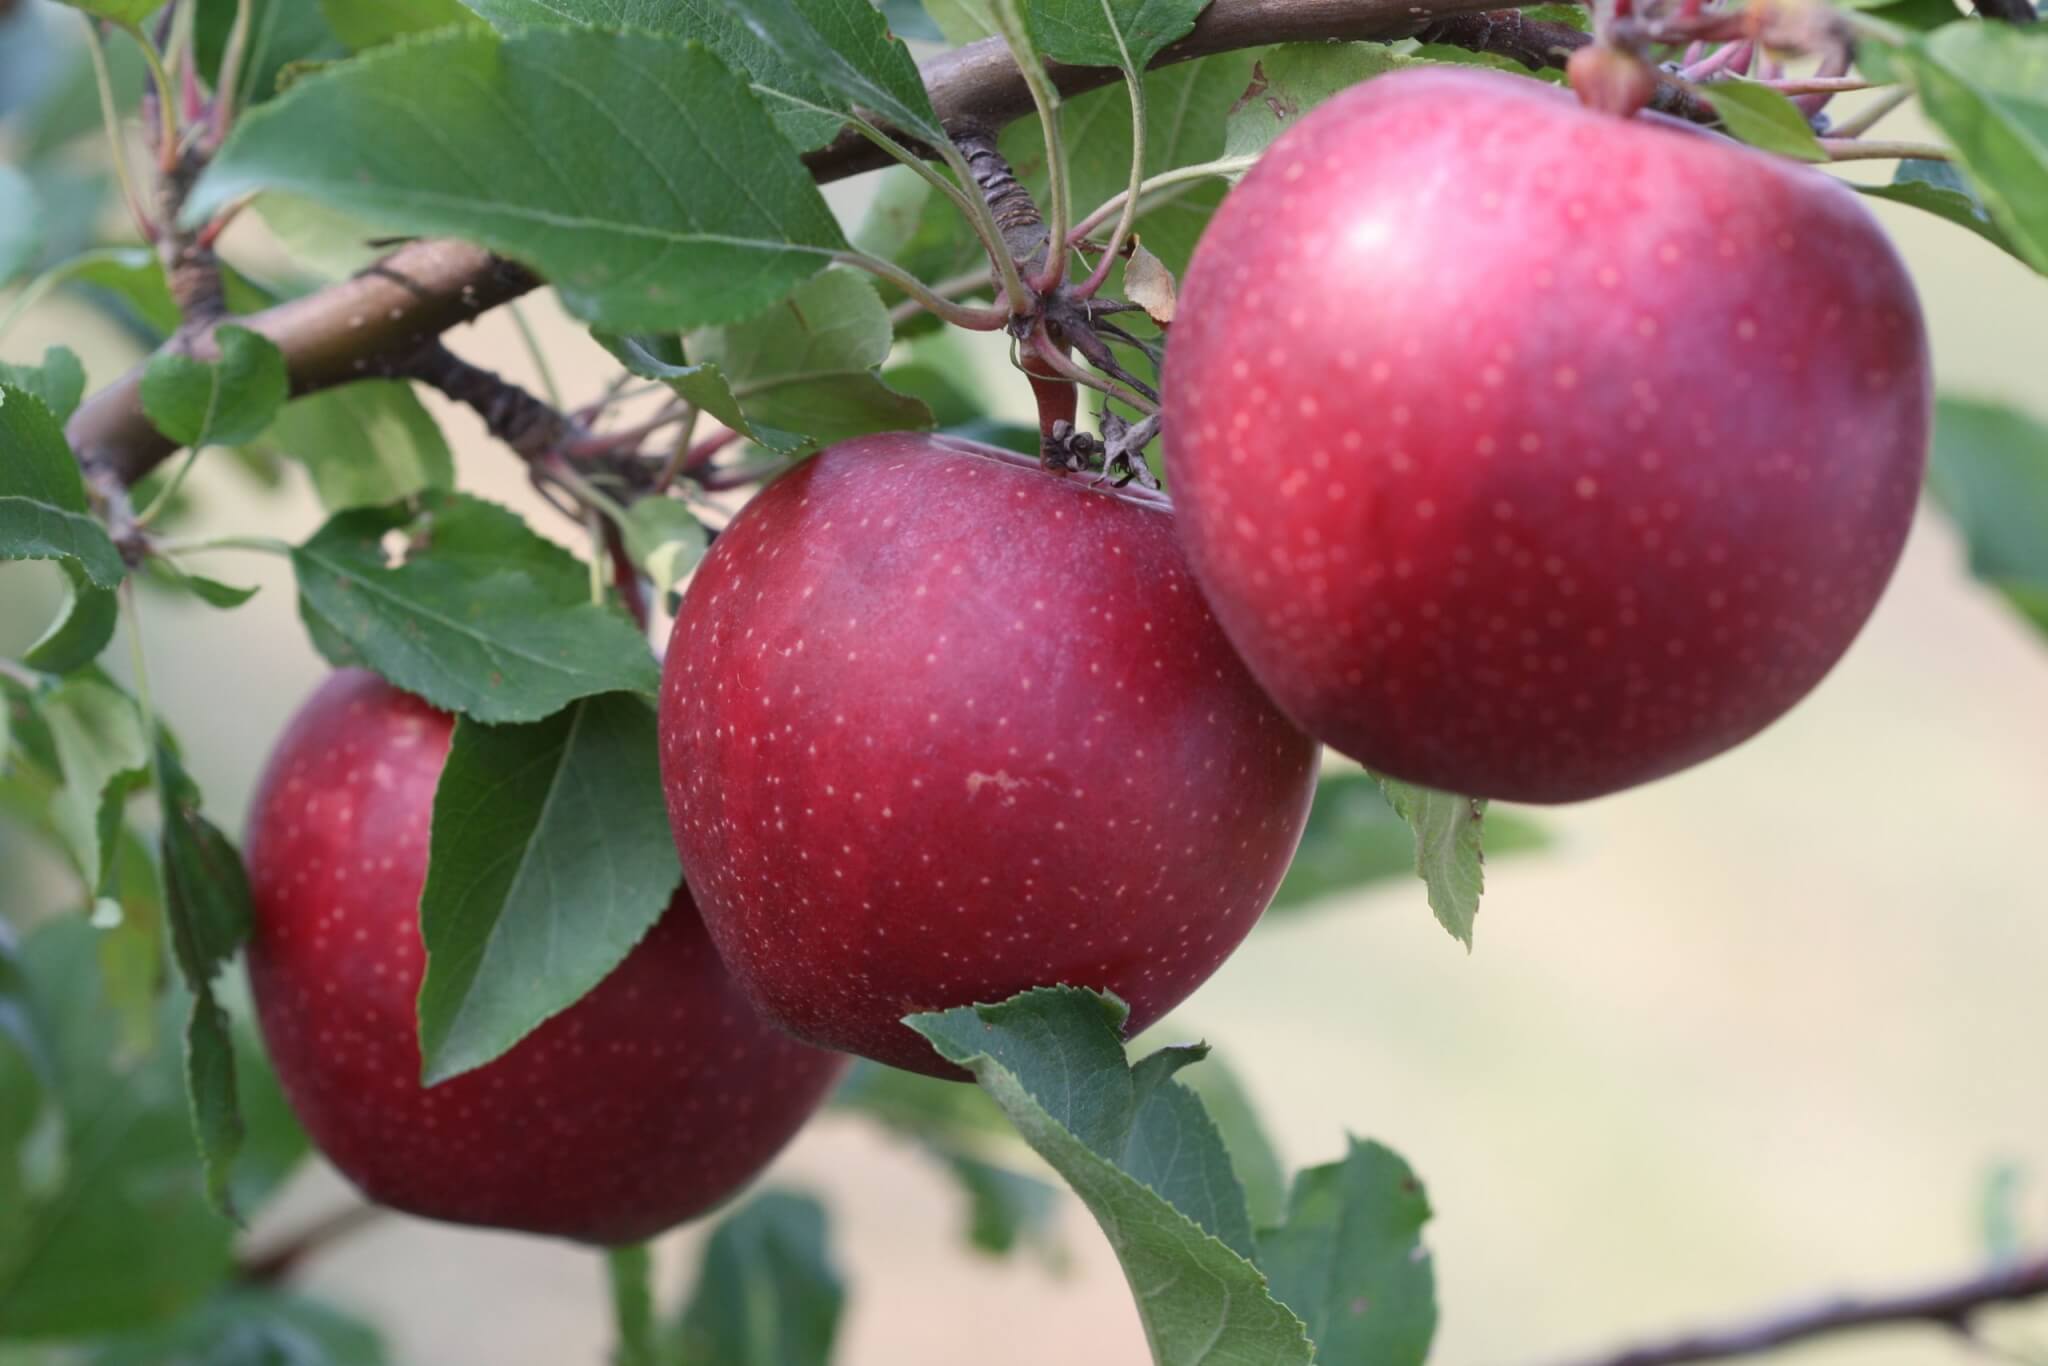 Red apples in a tree ready for harvest